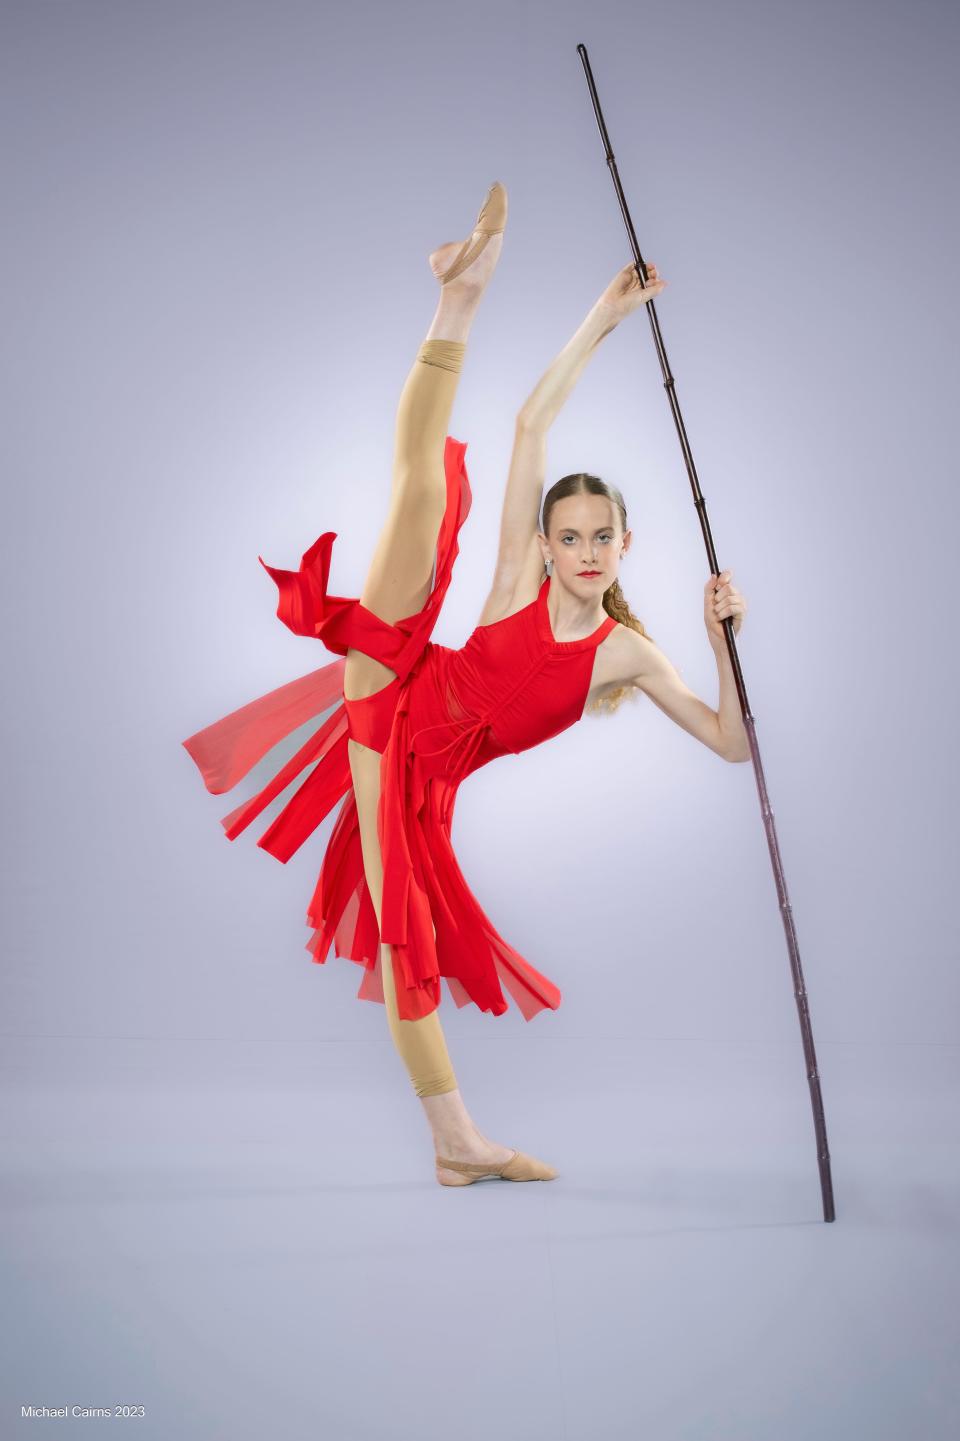 Dance Sun Country is set to present their 17th annual recital, featuring the theme “Fire and Ice,” at 1 p.m. May 18 at the Phillips Center.